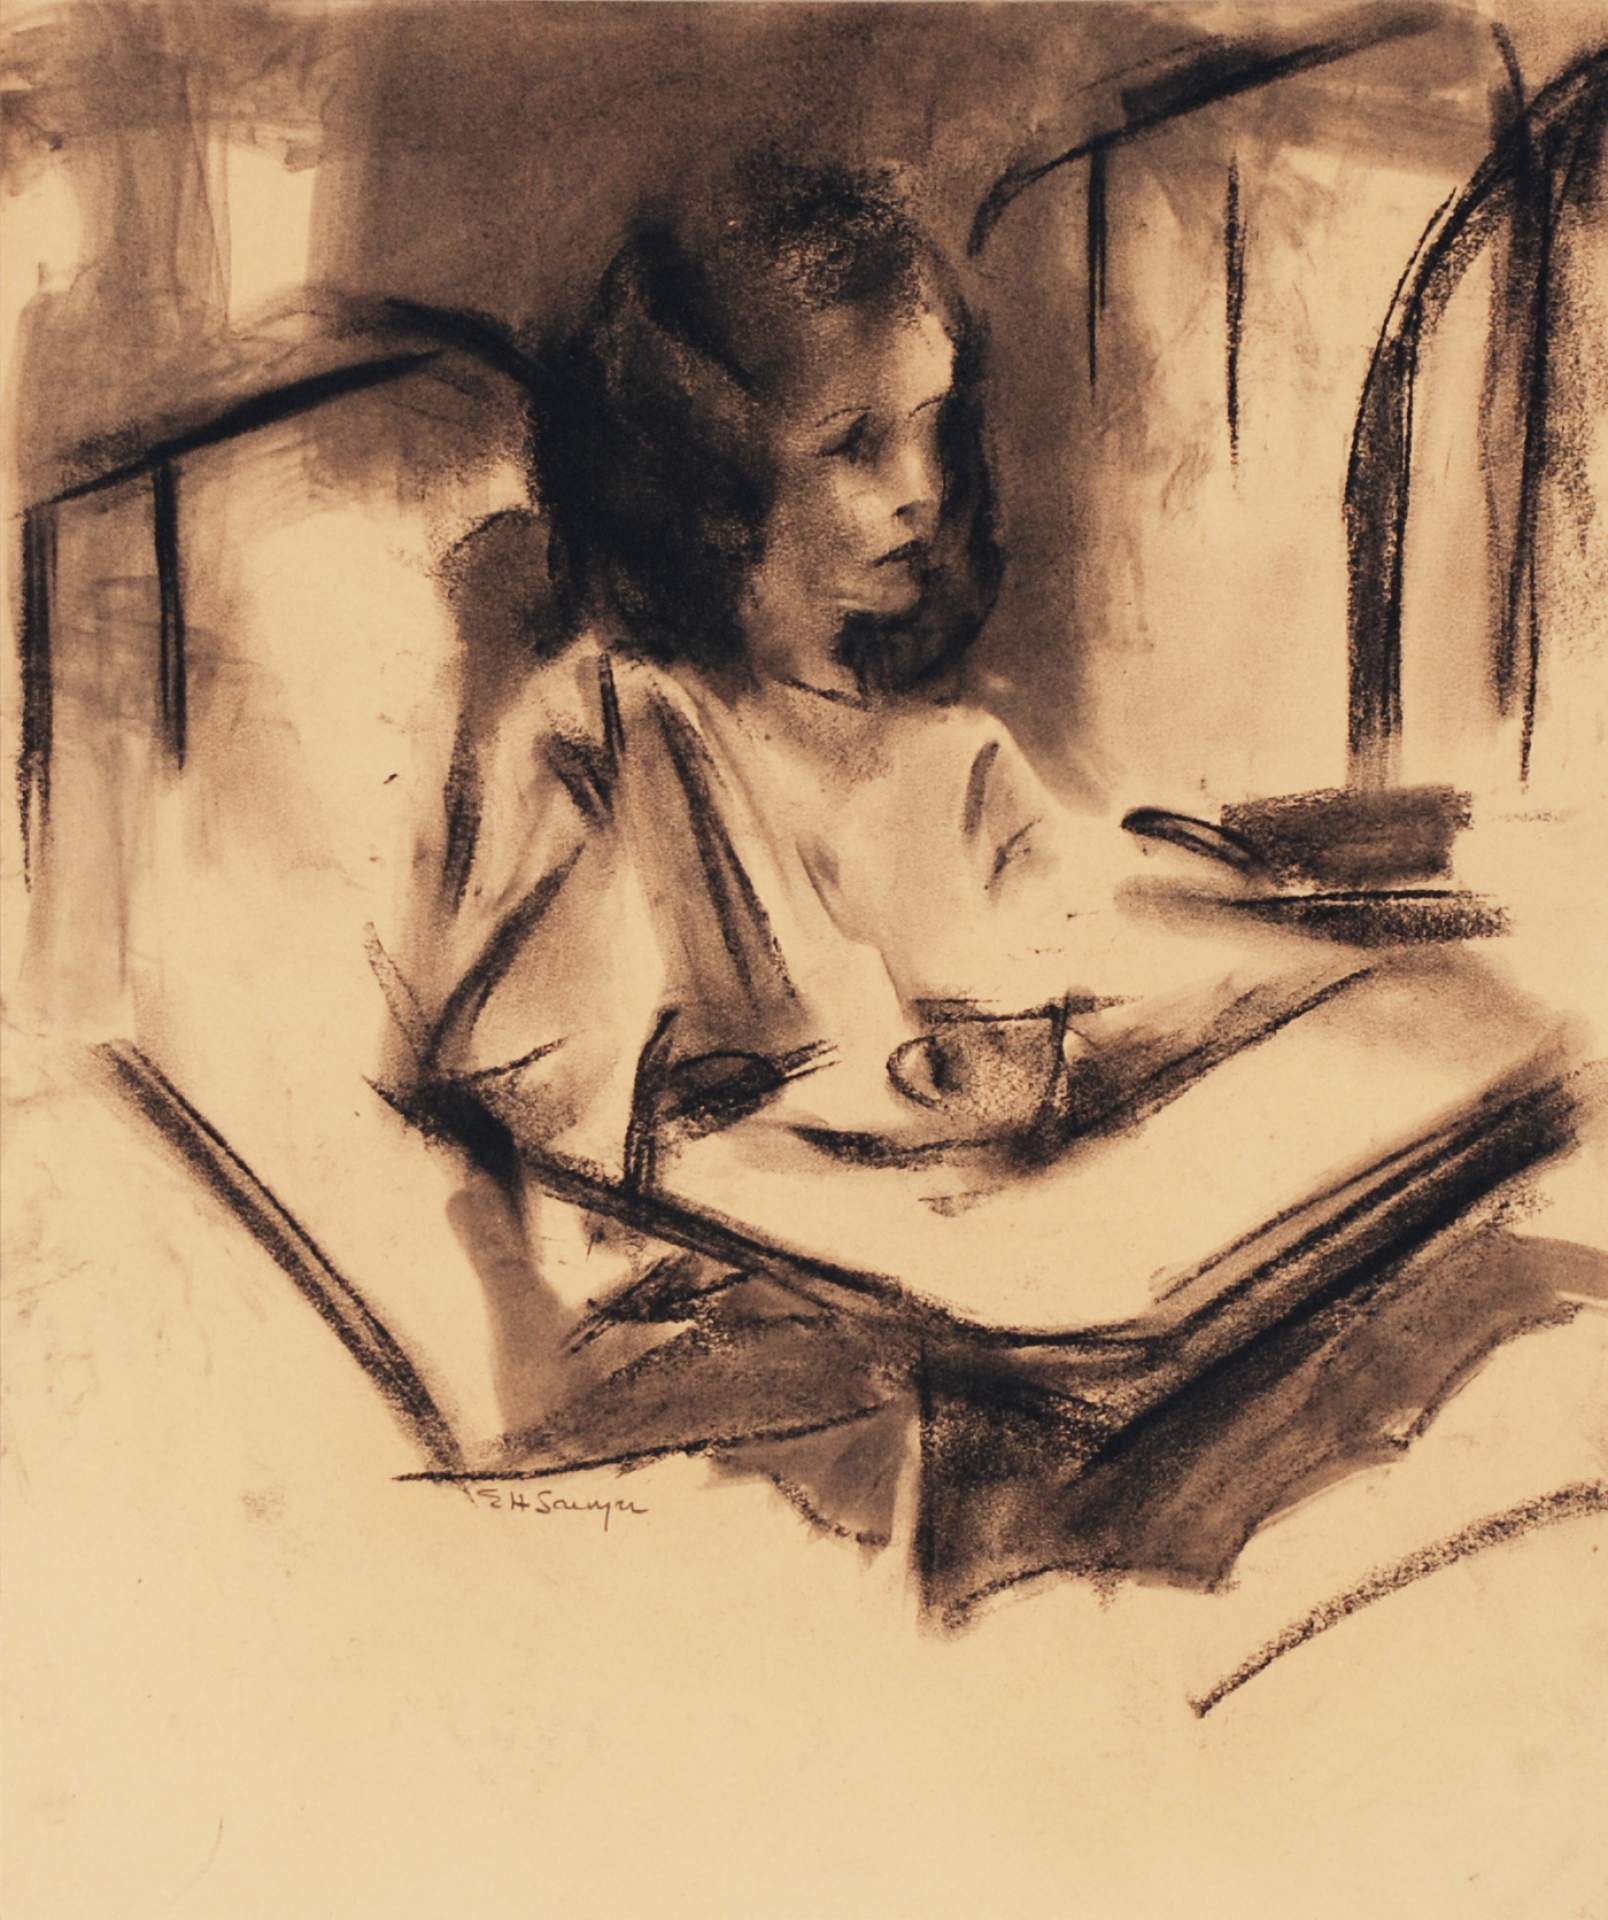 Untitled [woman patient in bed]